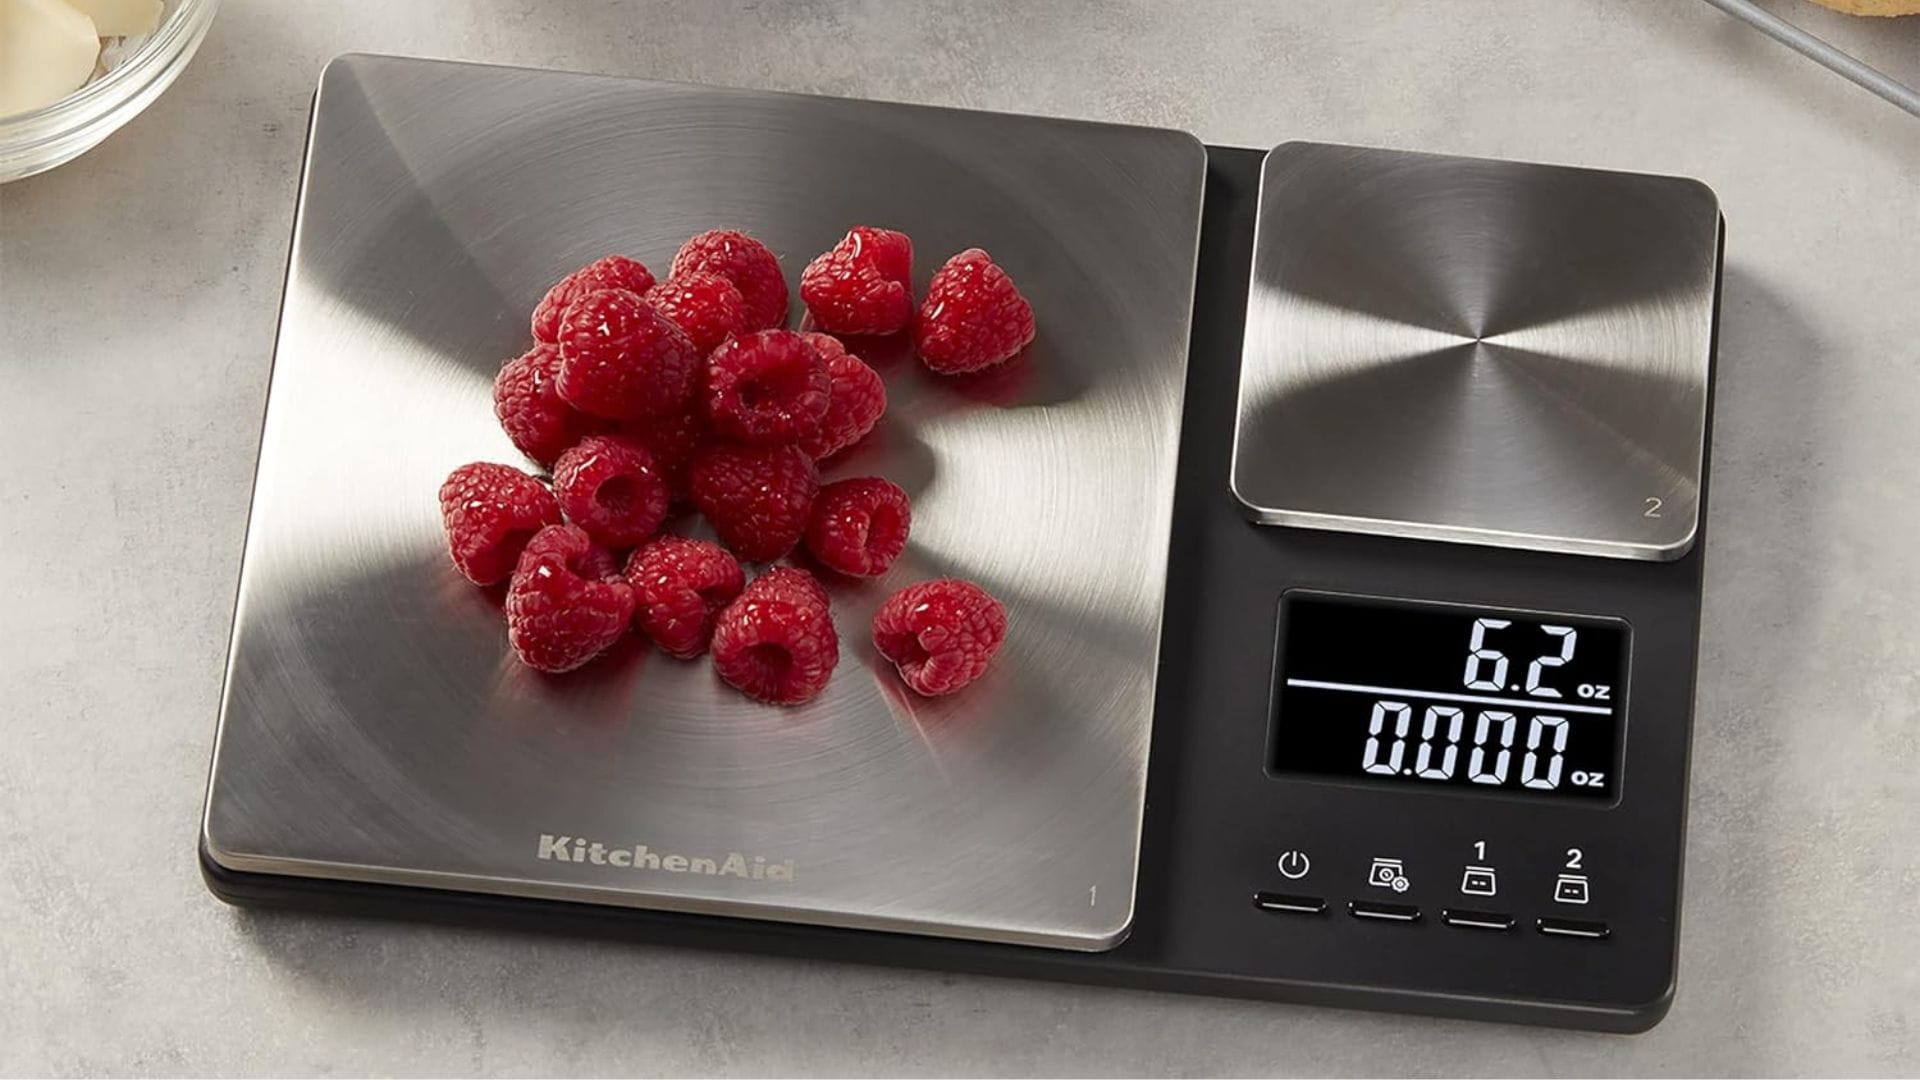 The Best Food Scales: KitchenAid 